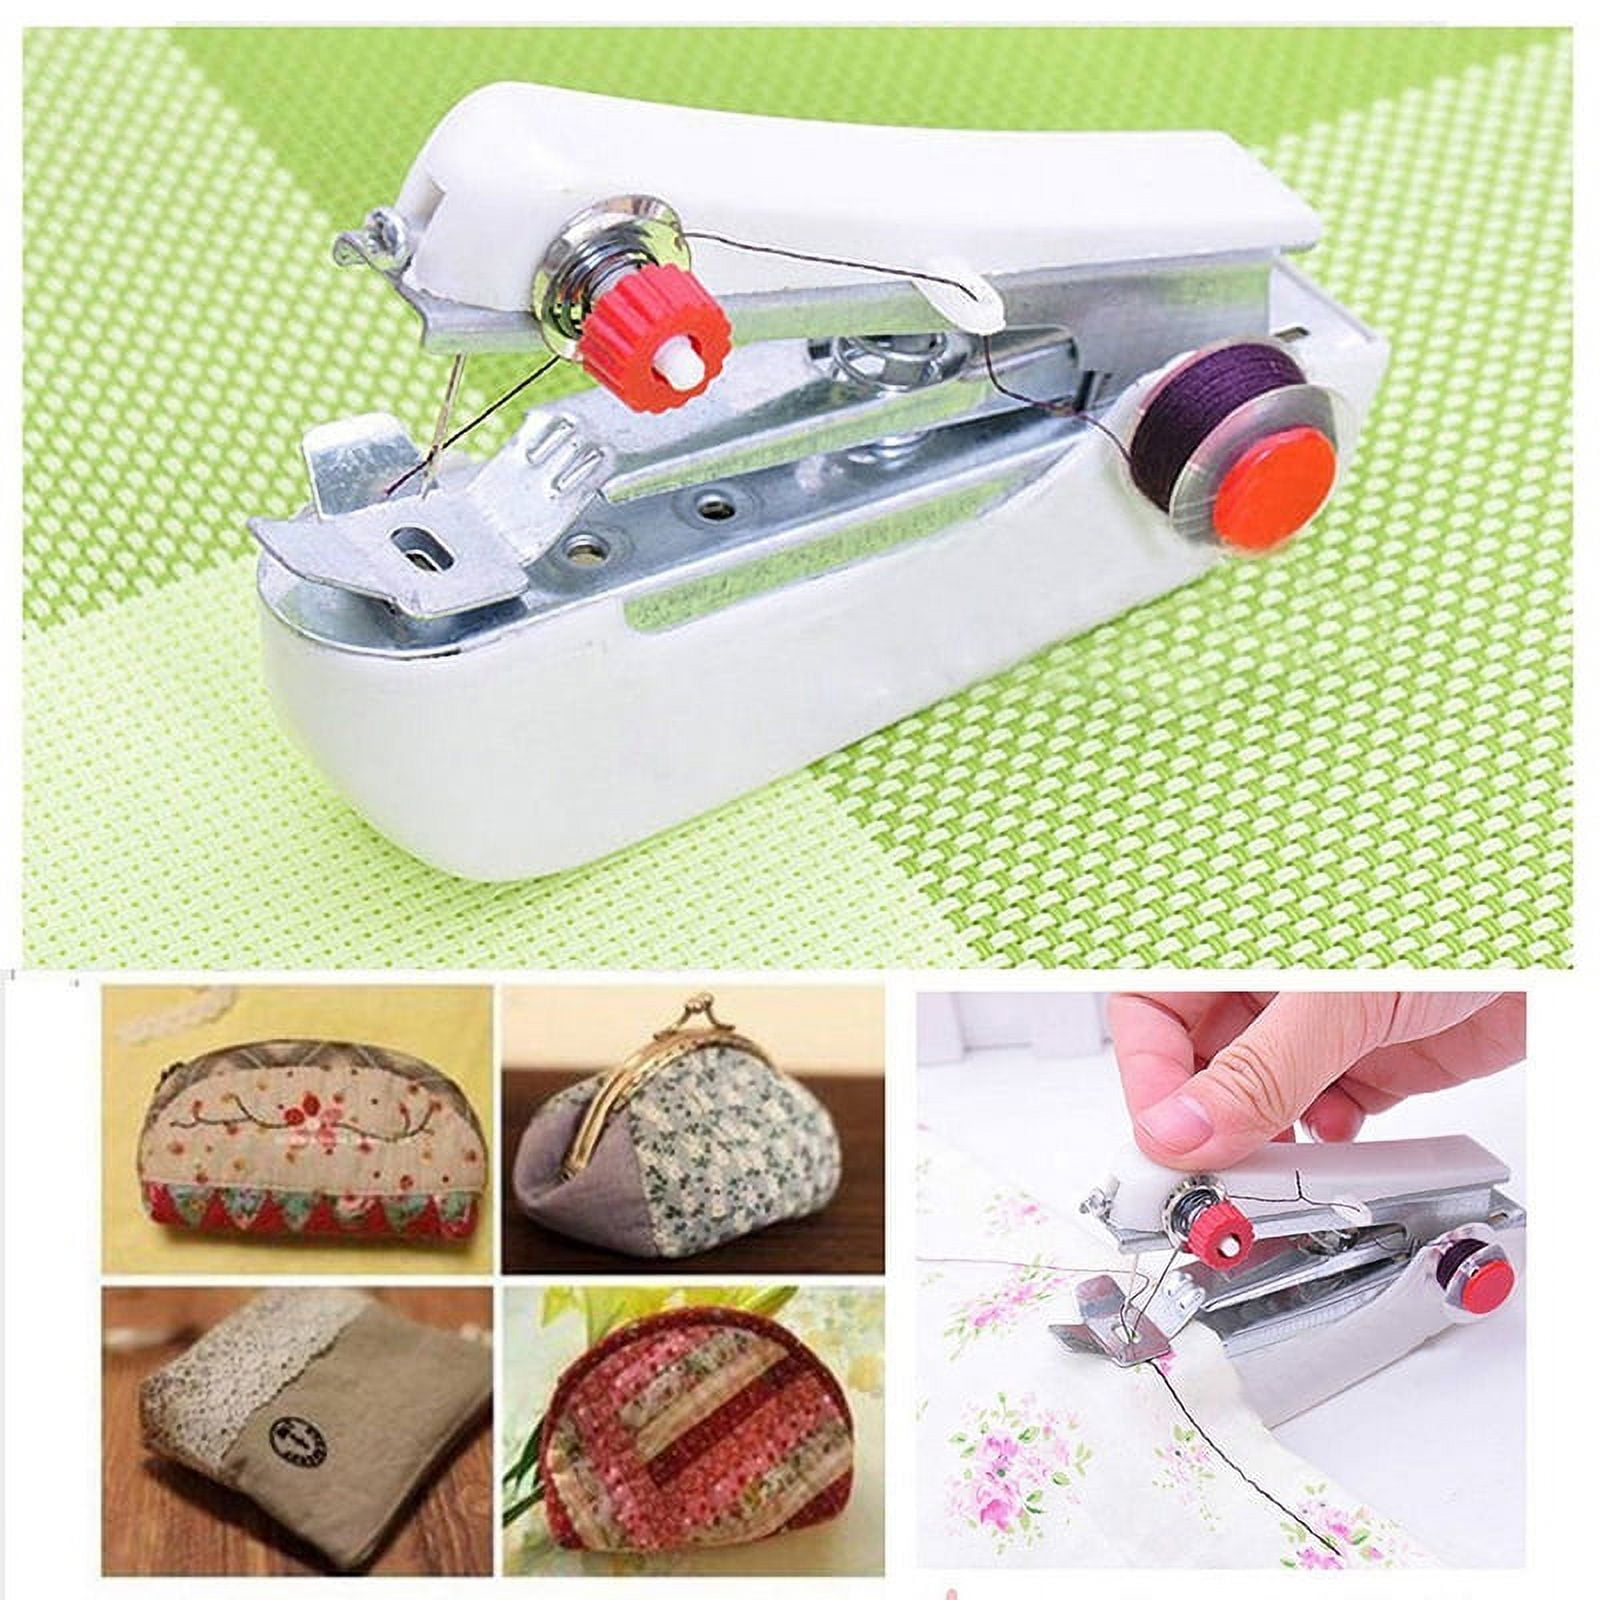 Clearance! Portable Electric Sewing Machine Mini Handheld Sewing ...